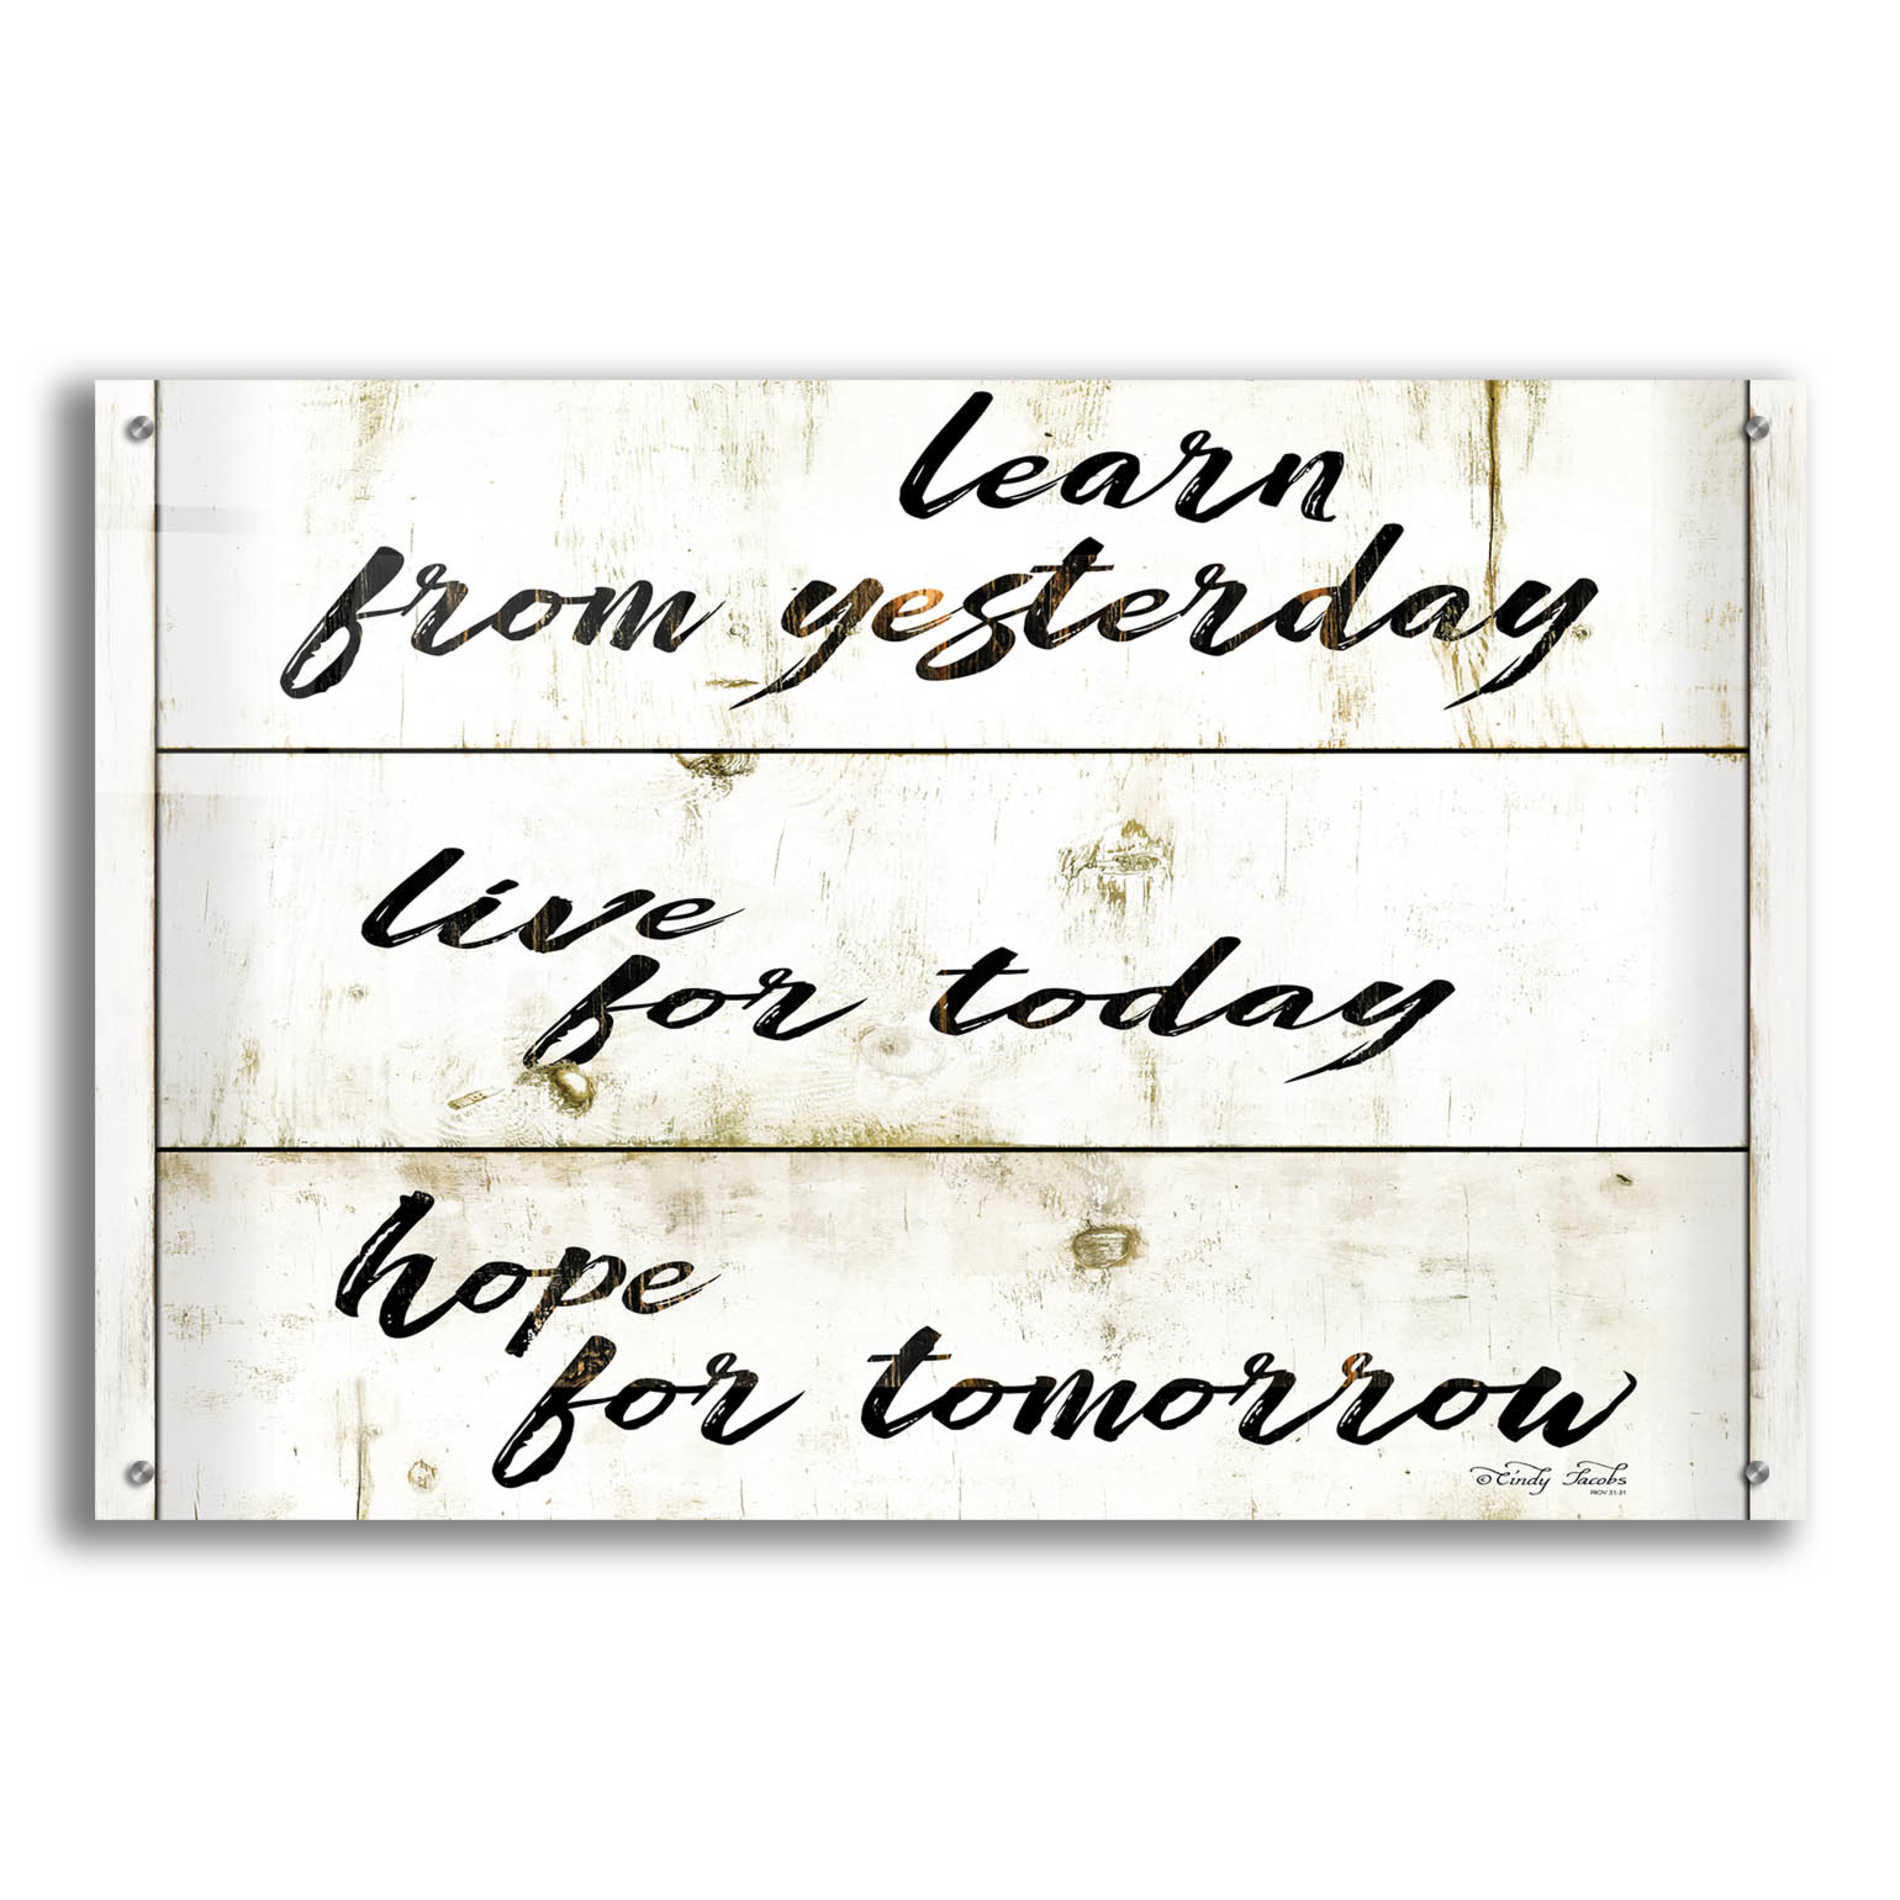 Epic Art 'Live for Today' by Cindy Jacobs, Acrylic Glass Wall Art,36x24